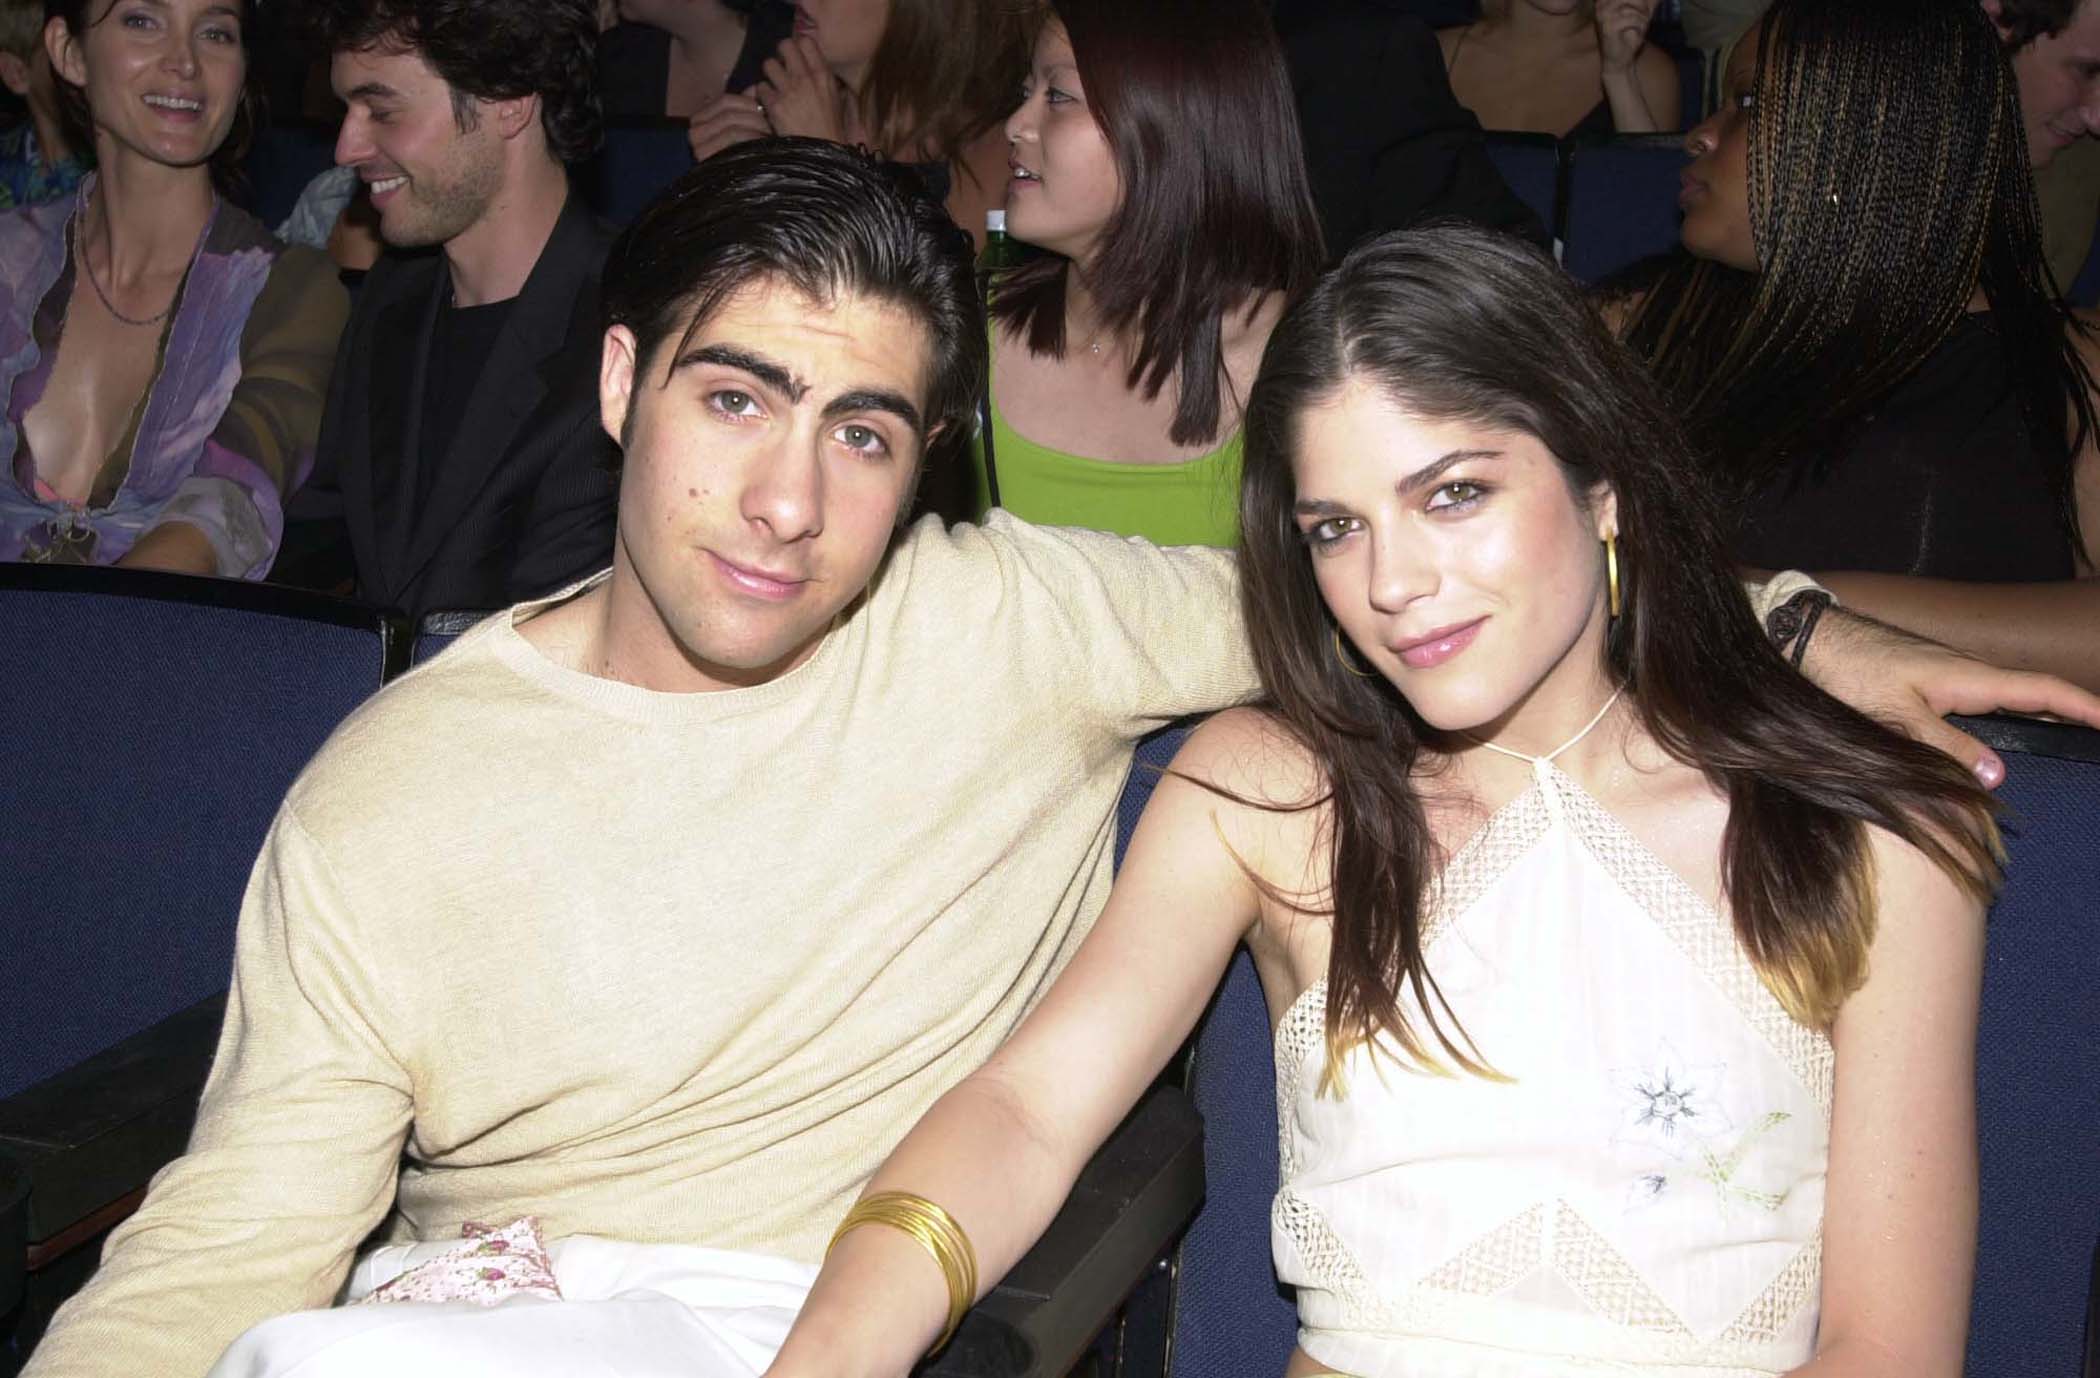 Jason Schwartzman and Selma Blair during 2000 MTV Movie Awards at Sony Studios in Culver City, California, on June 3, 2000. | Source: Getty Images